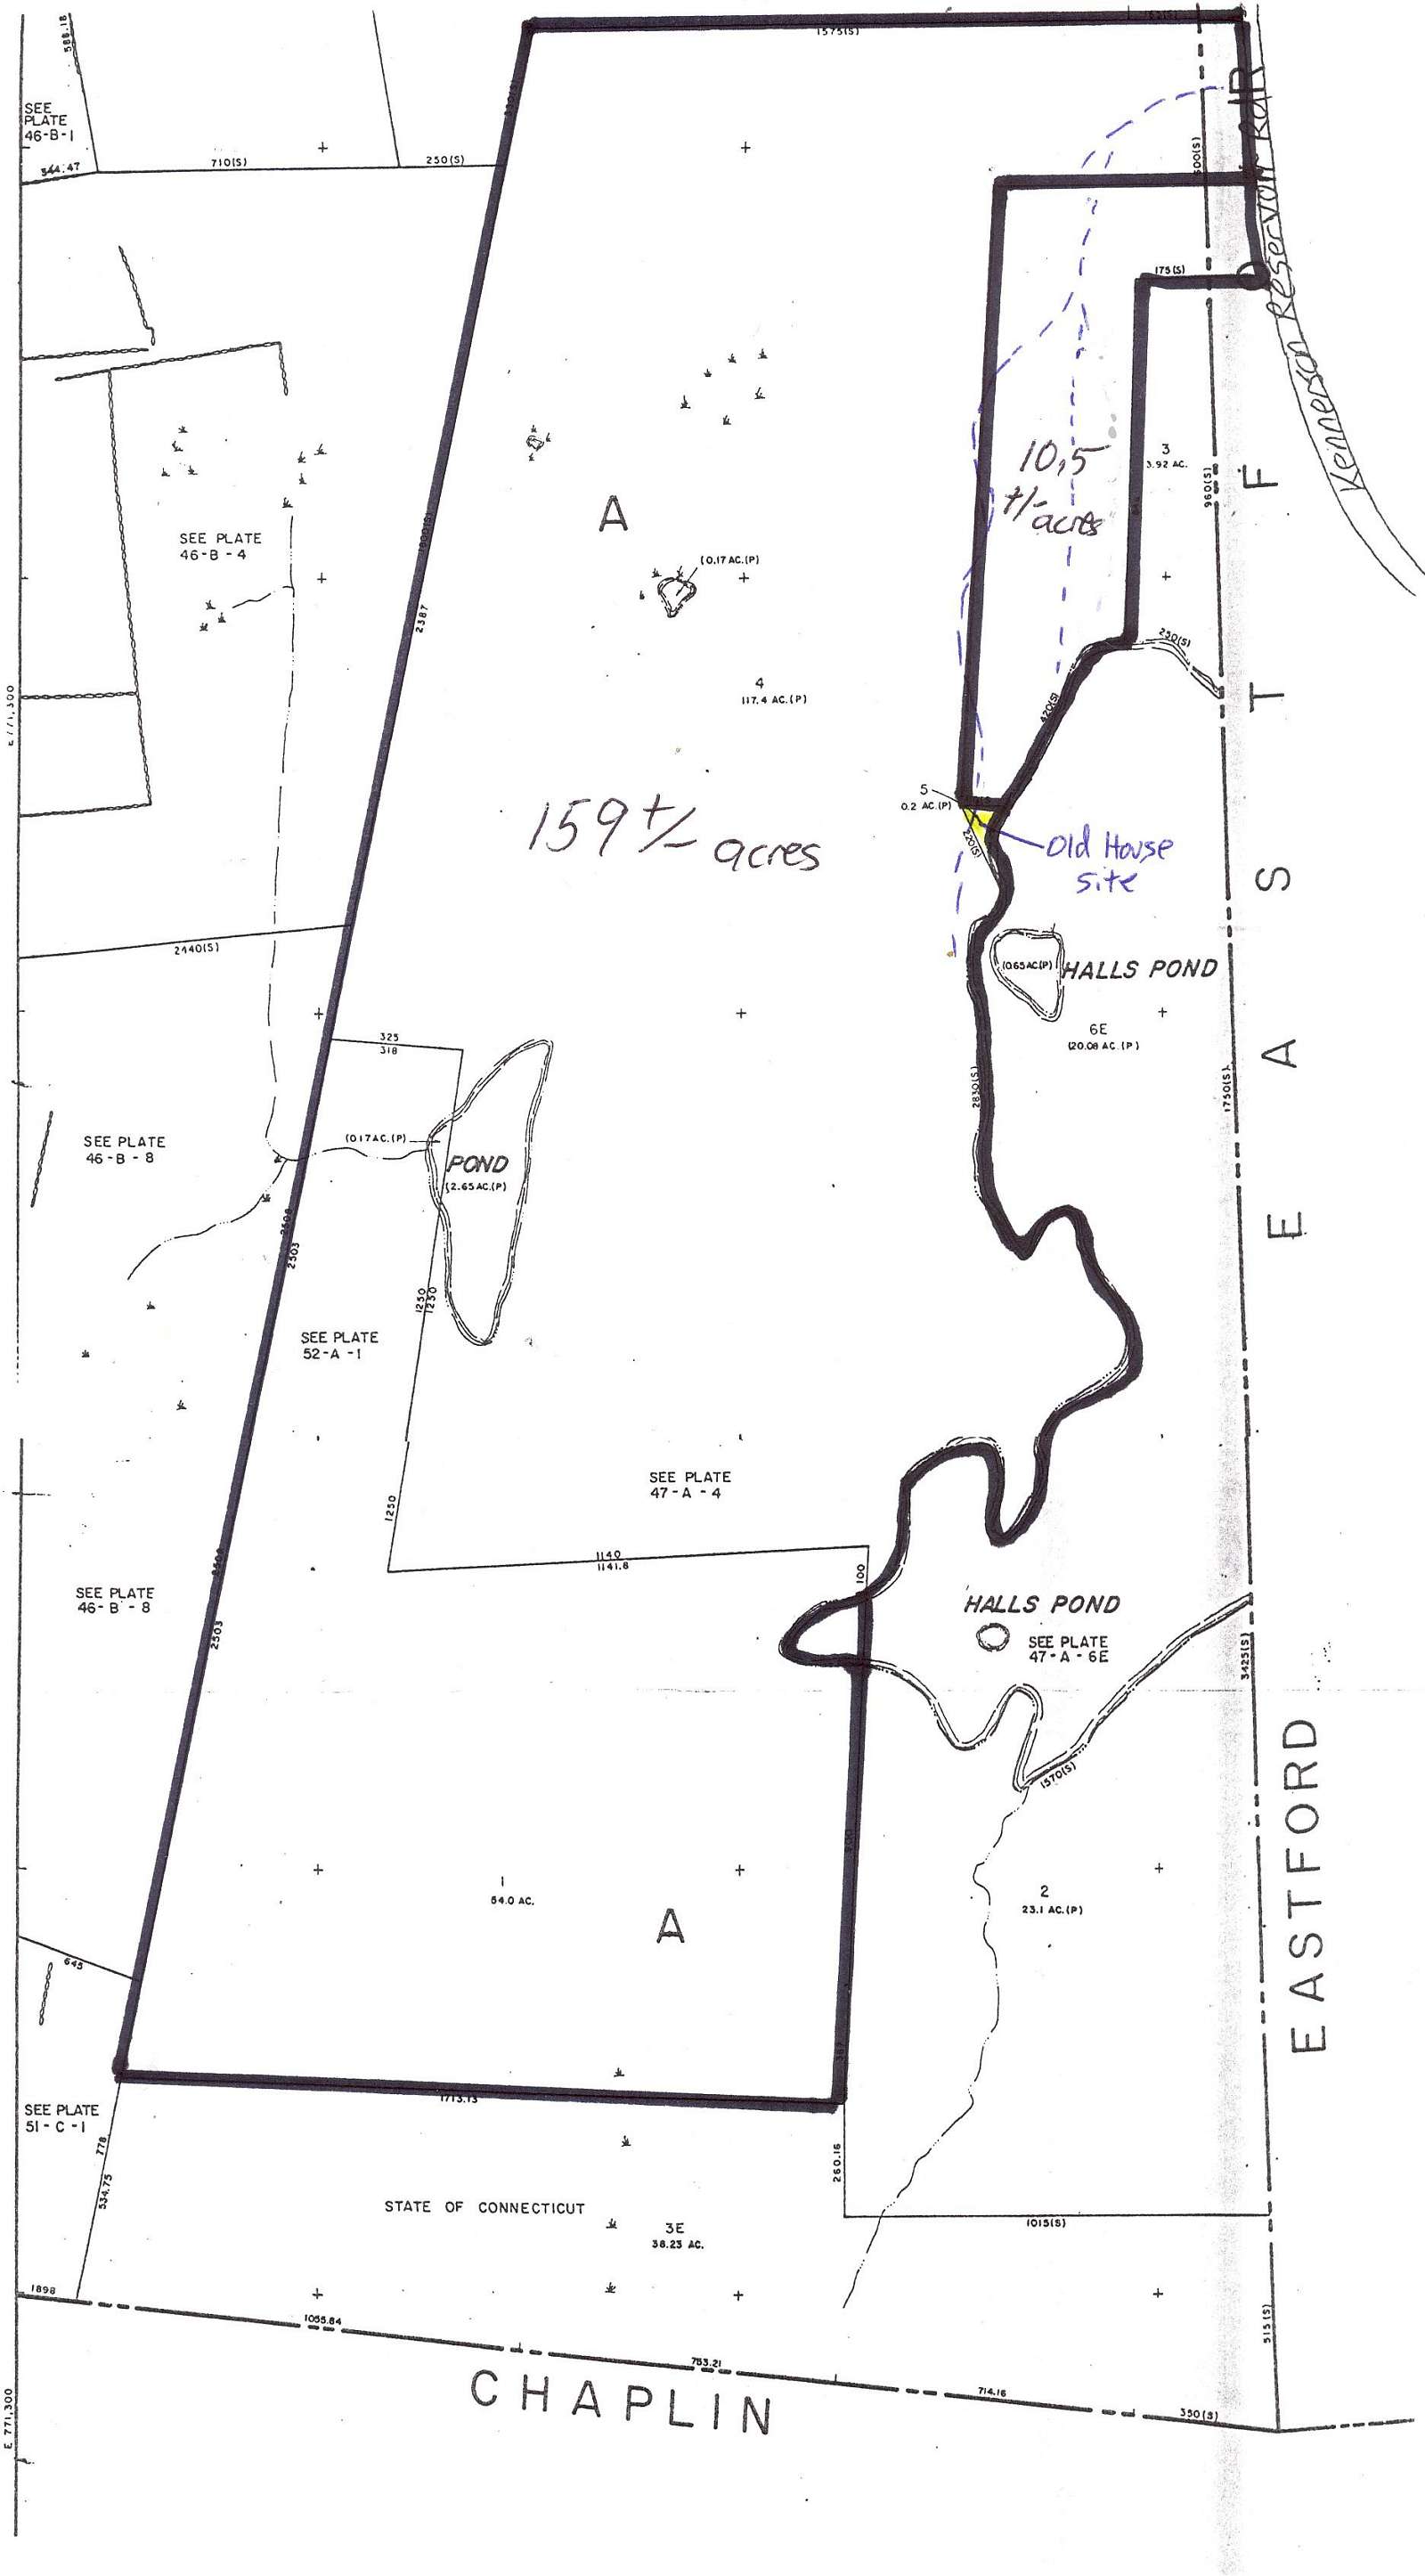 Large Lot layout map for 150 acre property.